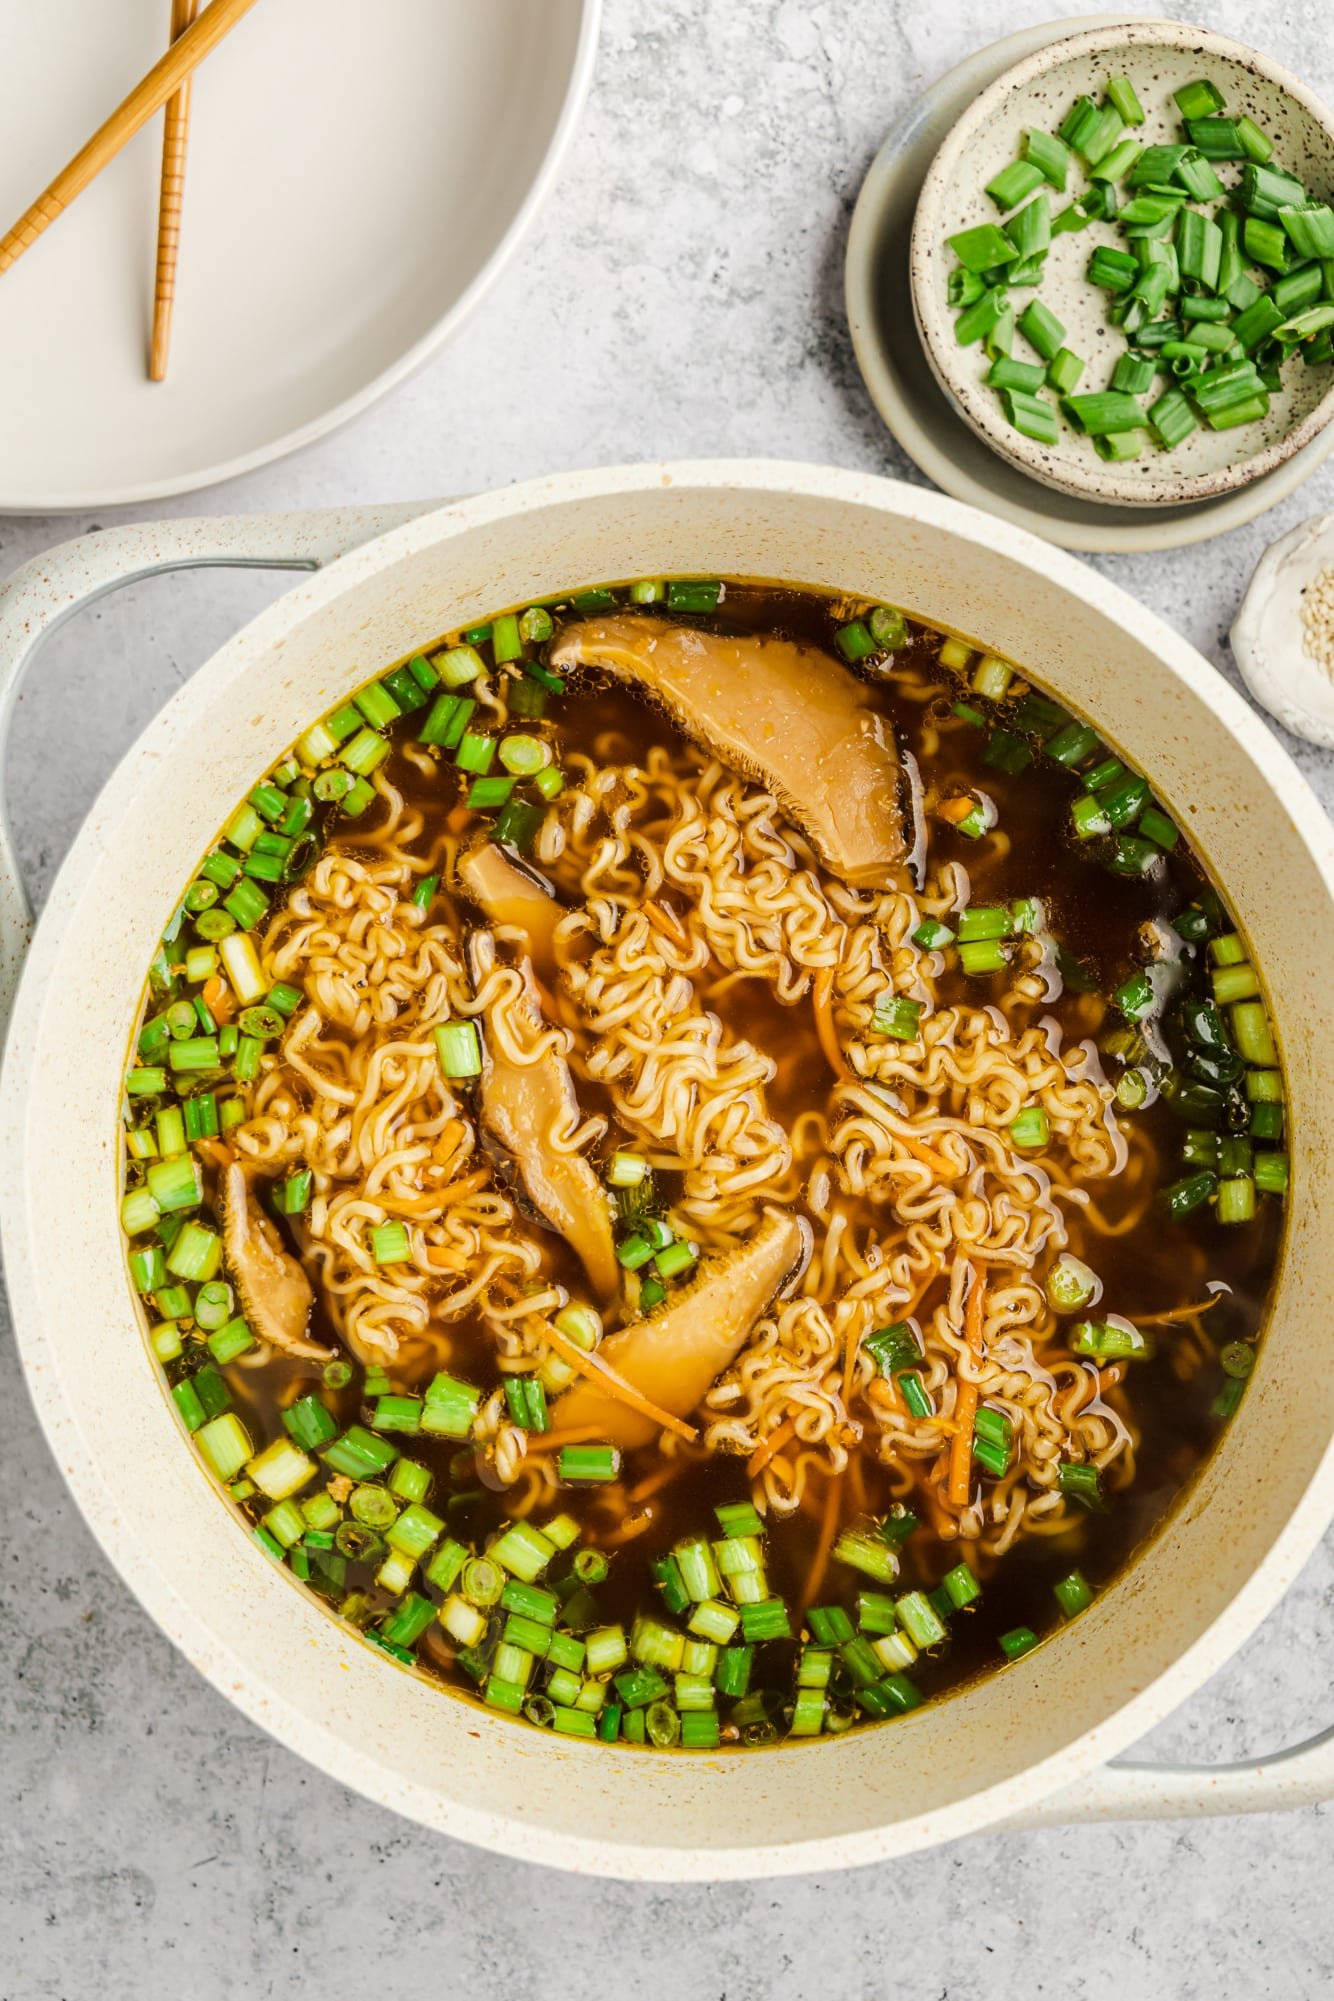 A large bowl of vegan ramen with a side of a small bowl of scallions.